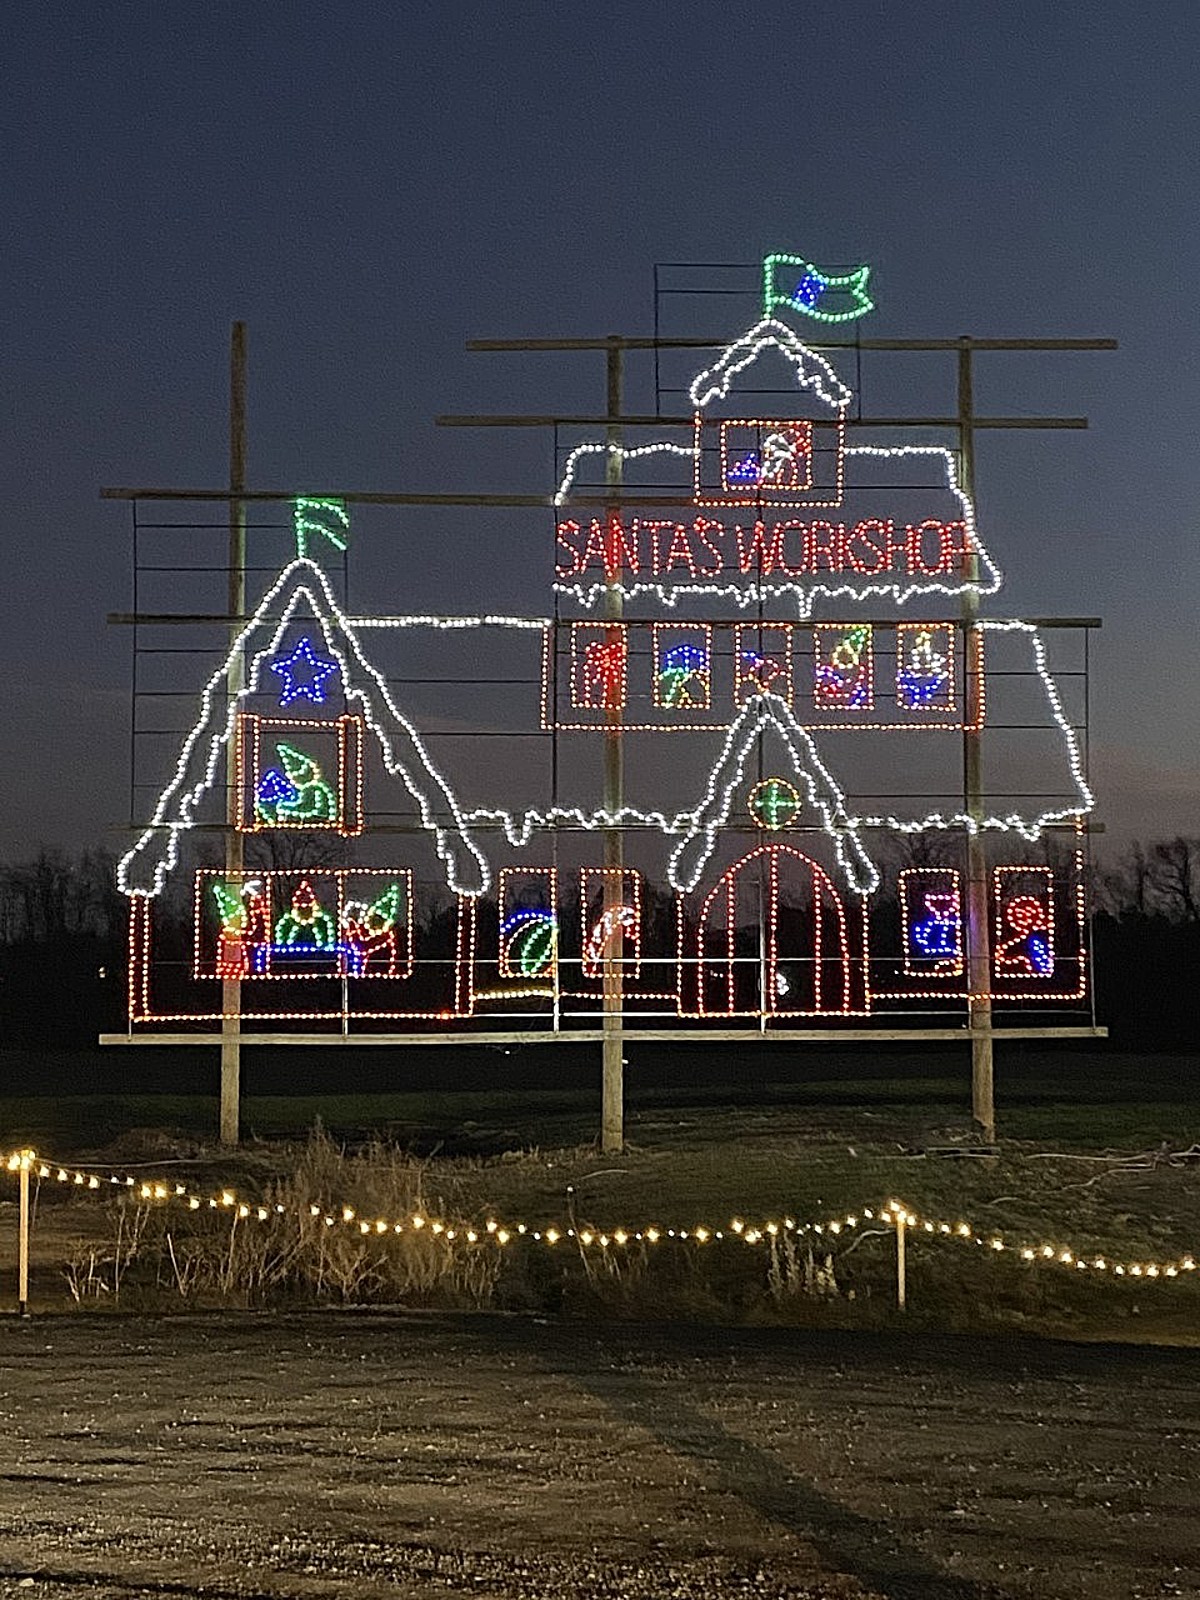 Discounted Holiday Light Show Still Open at Shady Brook Farm